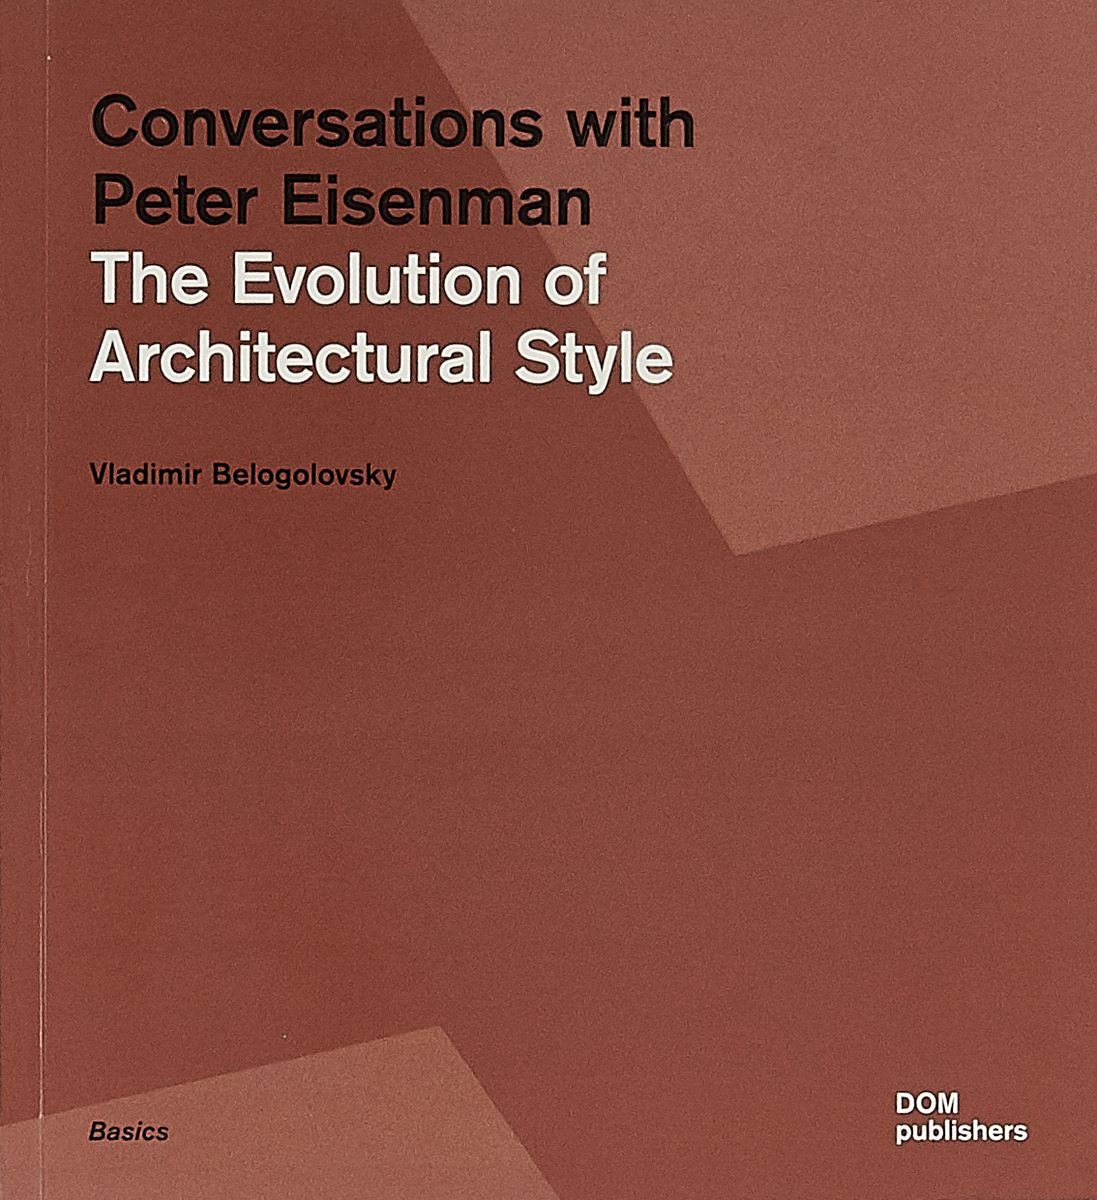 фото Conversations with Peter Eisenman: The Evolution of Architectural Style Dom publishers